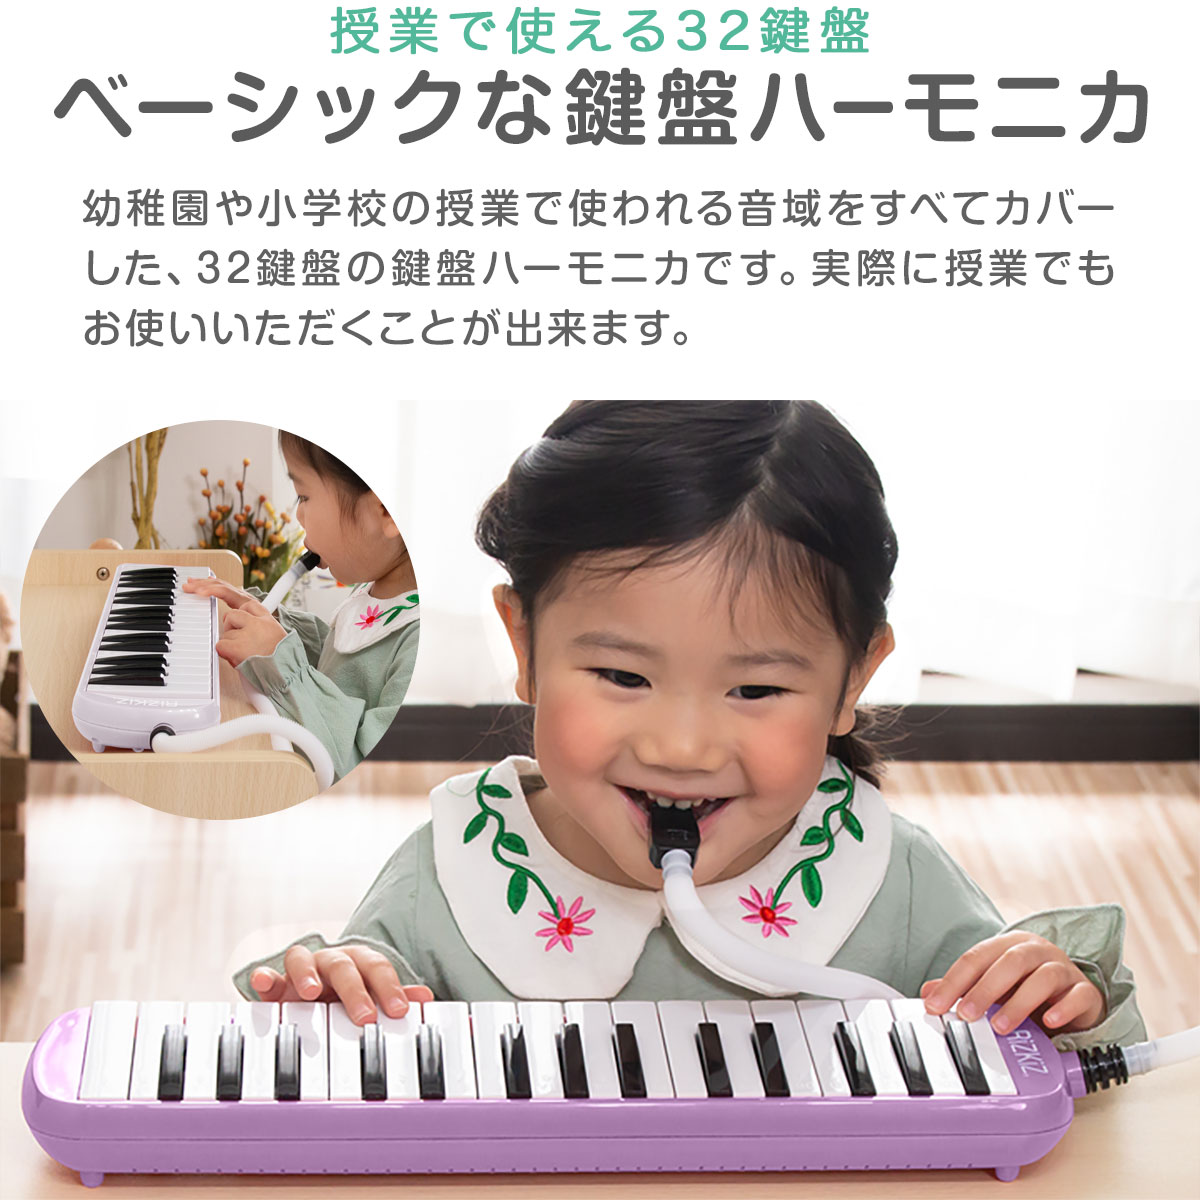 1 year guarantee melodica 32 keyboard case attaching table . for .. for present elementary school kindergarten child care . music blow .. sound floor pink blue green light blue blue green black free shipping 